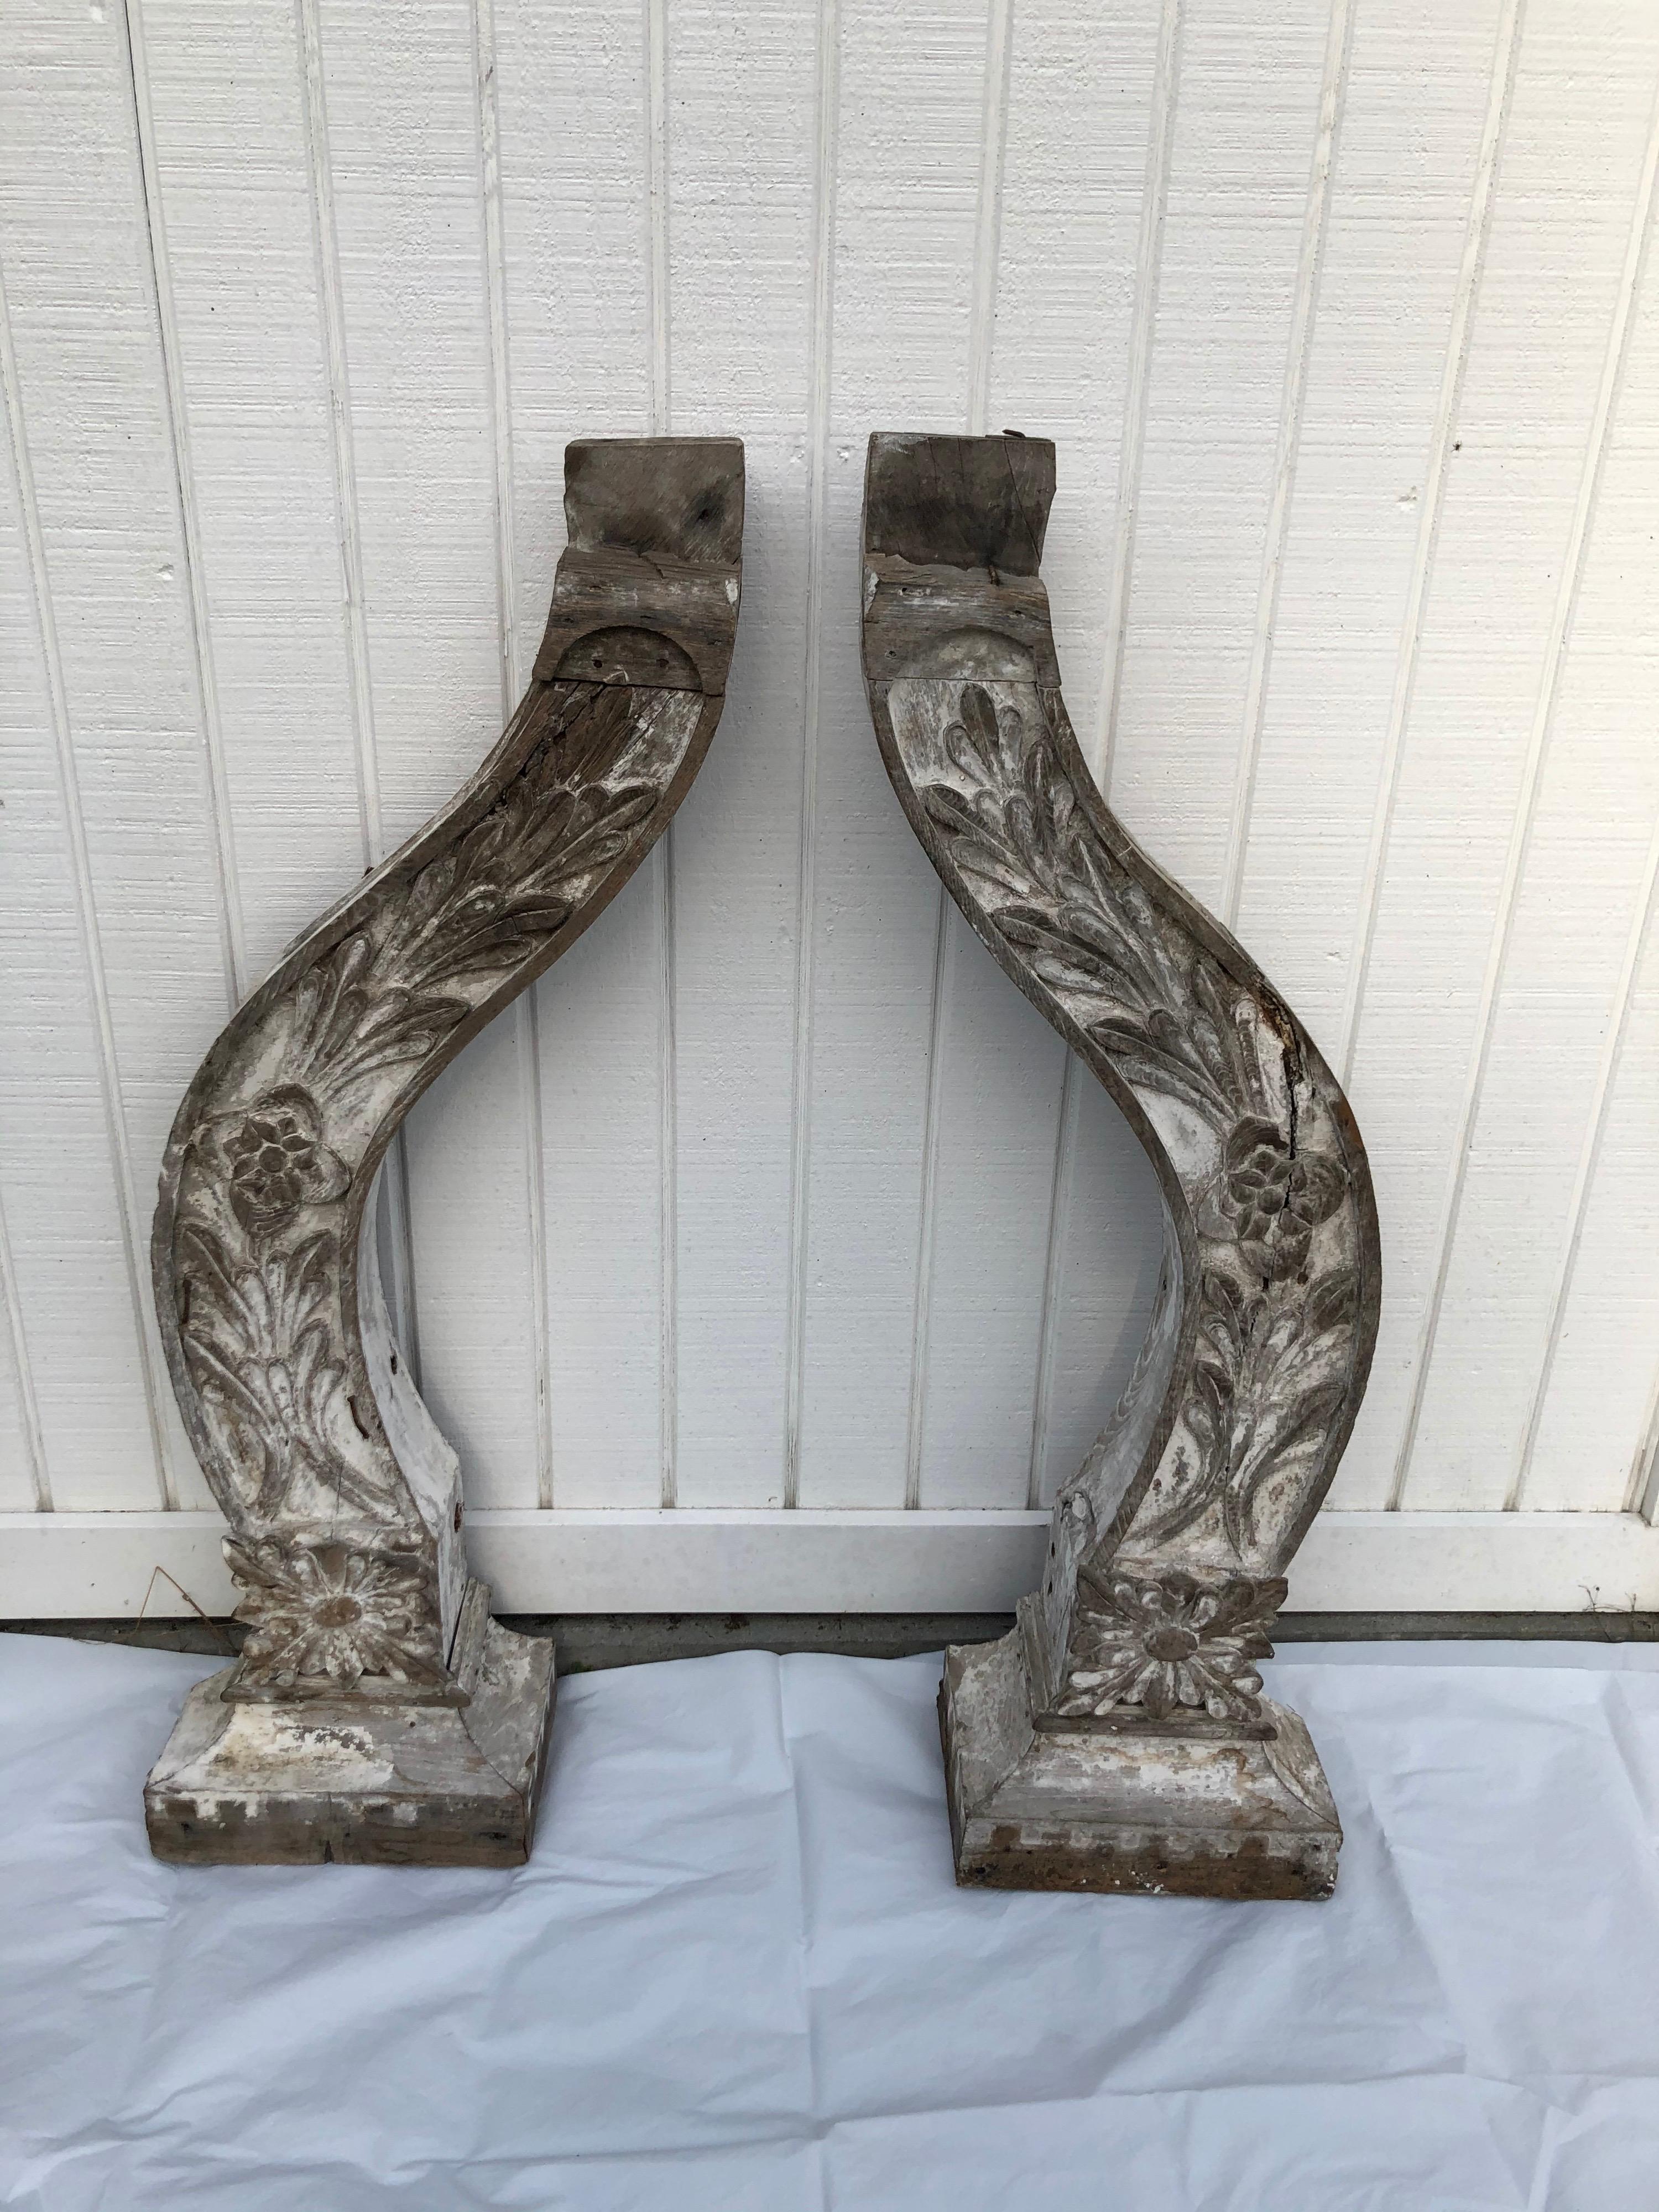 Pair of Large Shabby Chic Farm-House Corbels or Wall Sconces For Sale 9